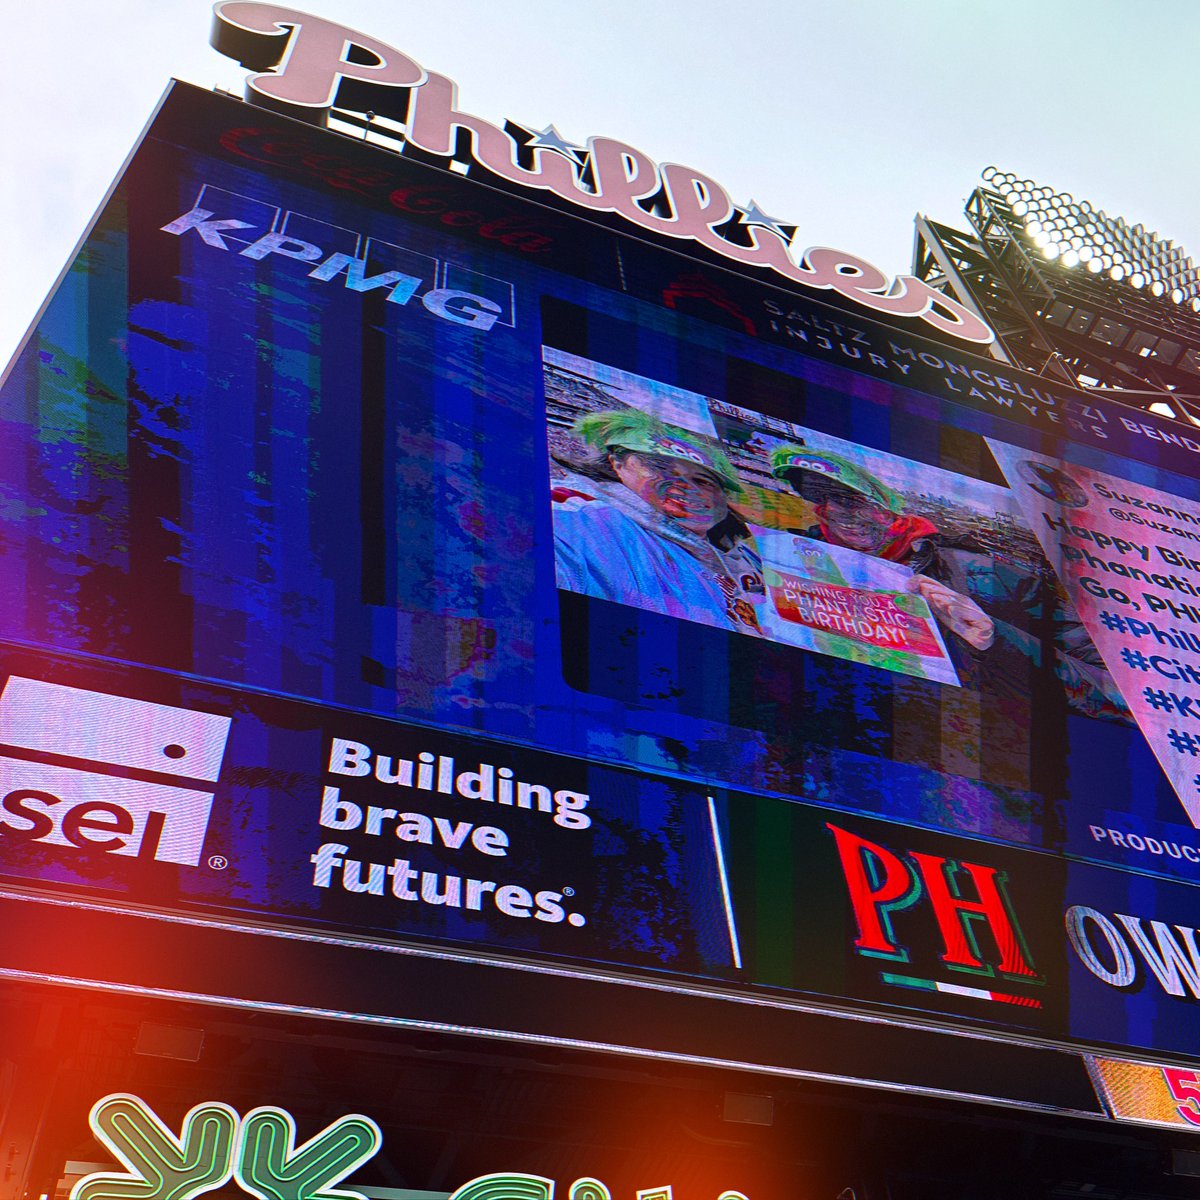 Love seeing PACT friends and supporters like @KPMG_US and @SEIInvestments the big screen at the @Phillies game!